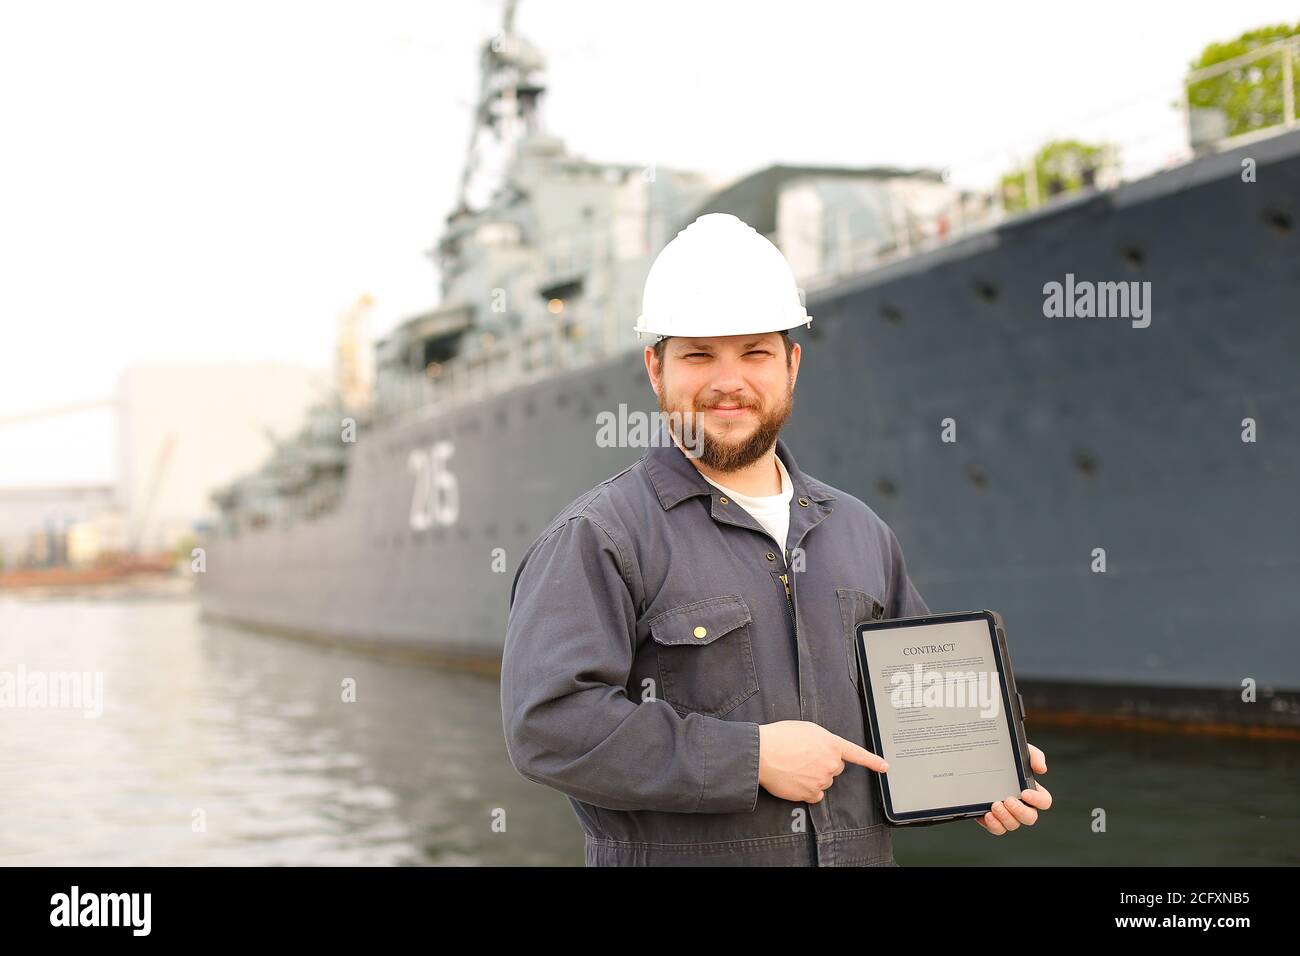 Captain in helmet showing contract on tablet near vessel in background. Stock Photo